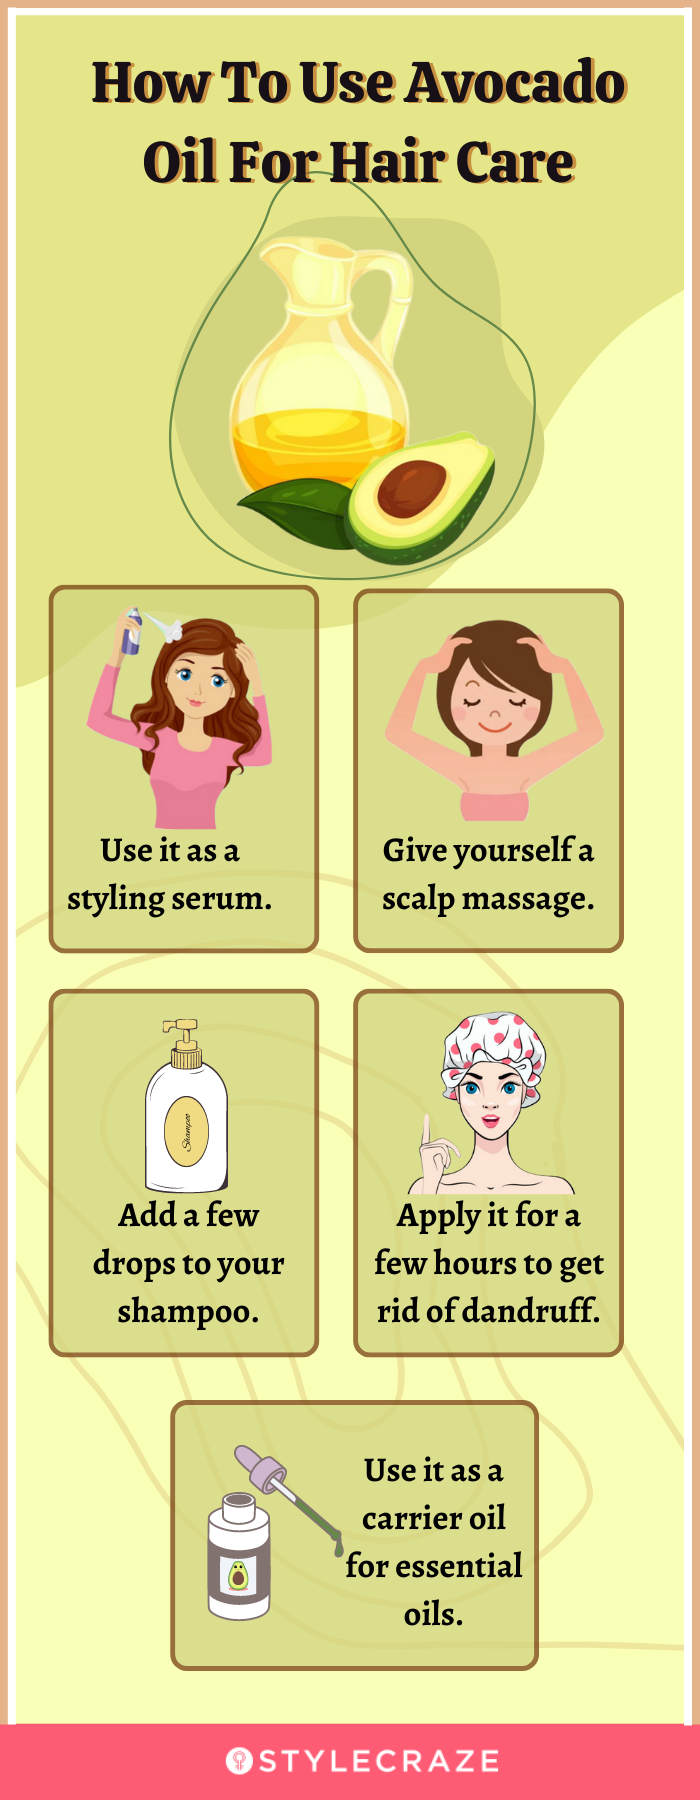 how to use avocado oil for hair care [infographic]